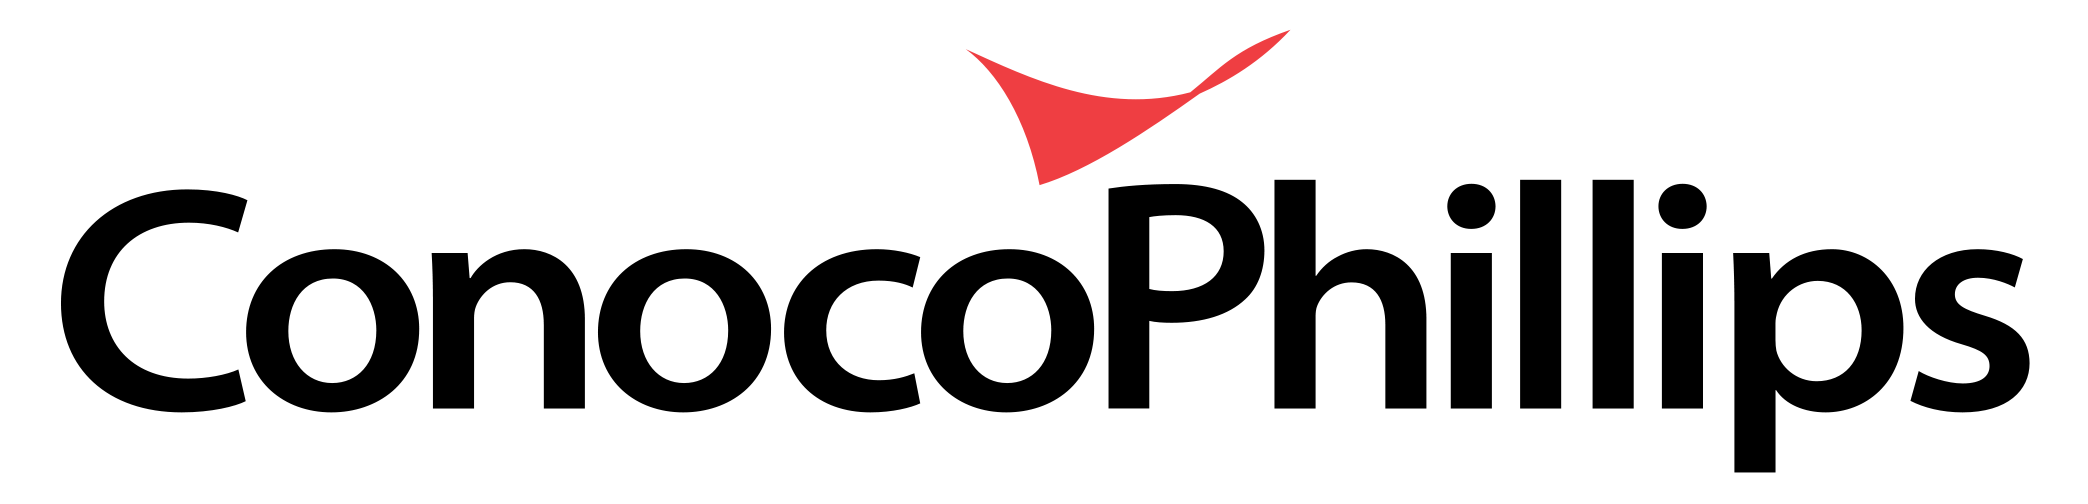 conocophillips-logo-png--2088.png